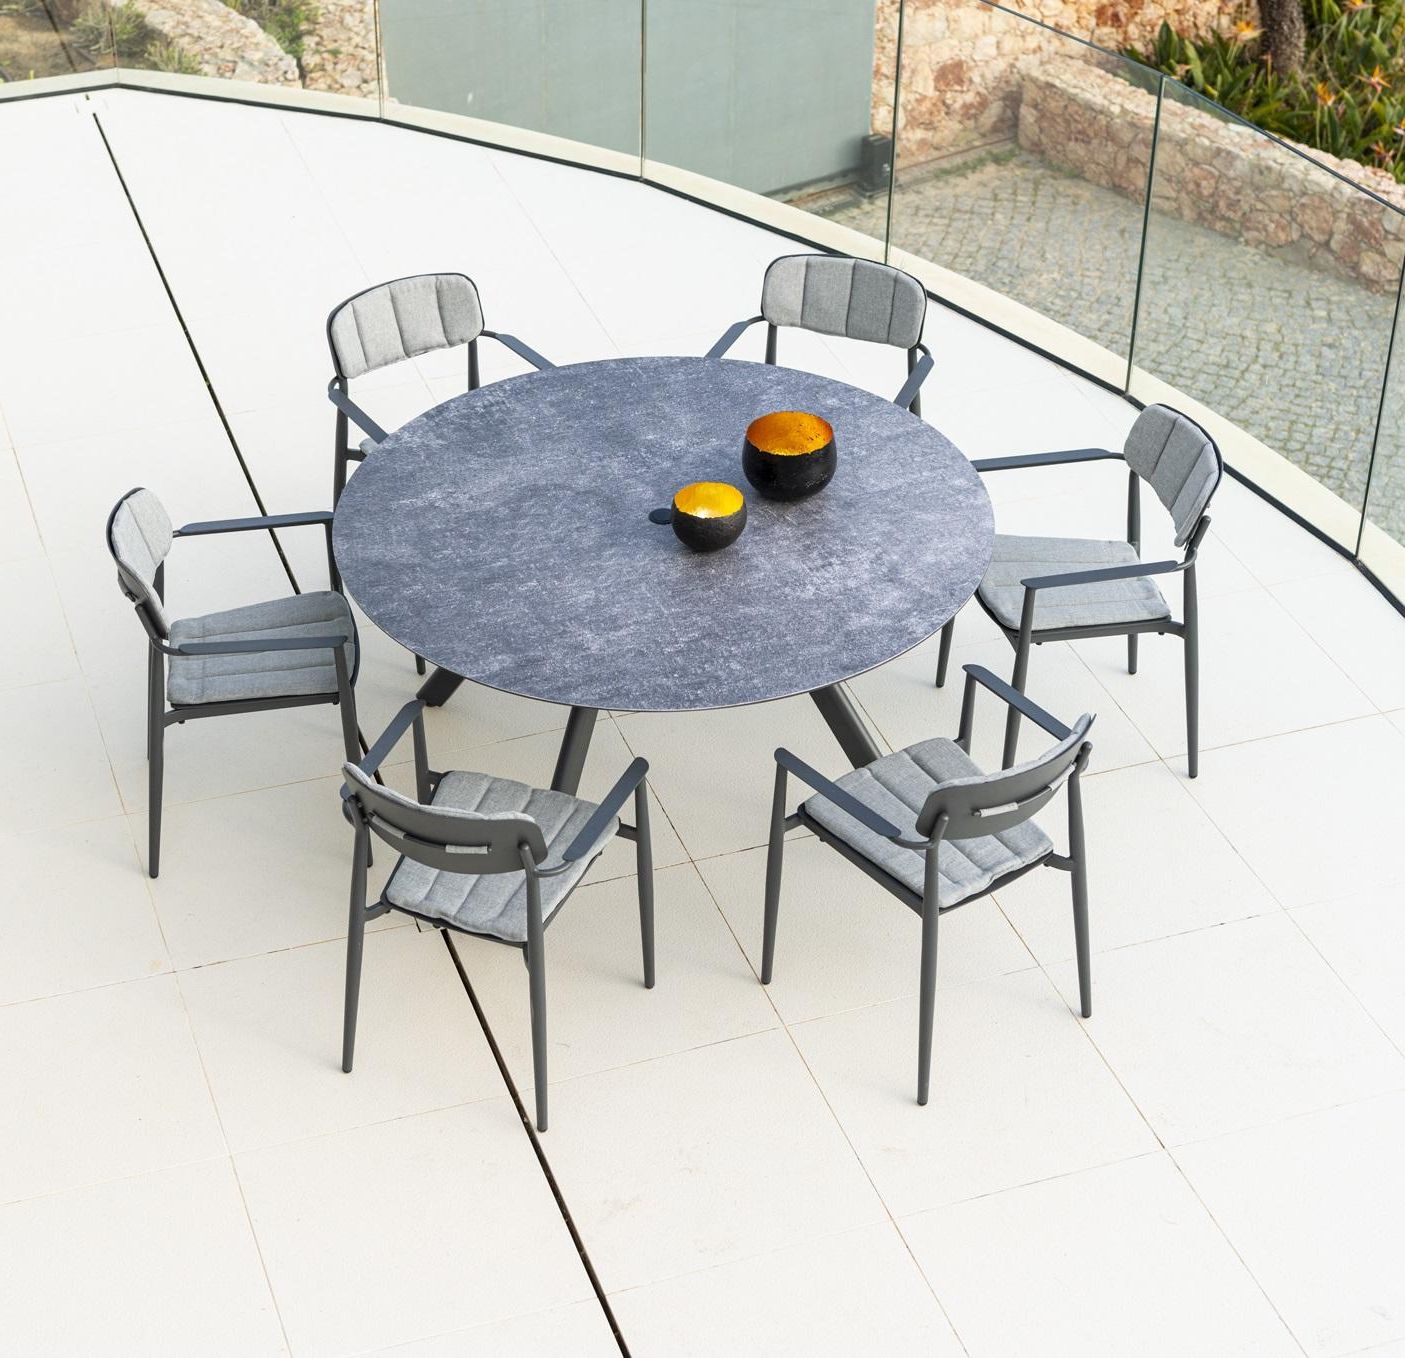 Metal Table Patio Furniture Throughout Best And Newest Circular Modern Metal Garden Dining Table With Either 6 Side Chairs Or  Armed Dining Chairs (View 8 of 15)